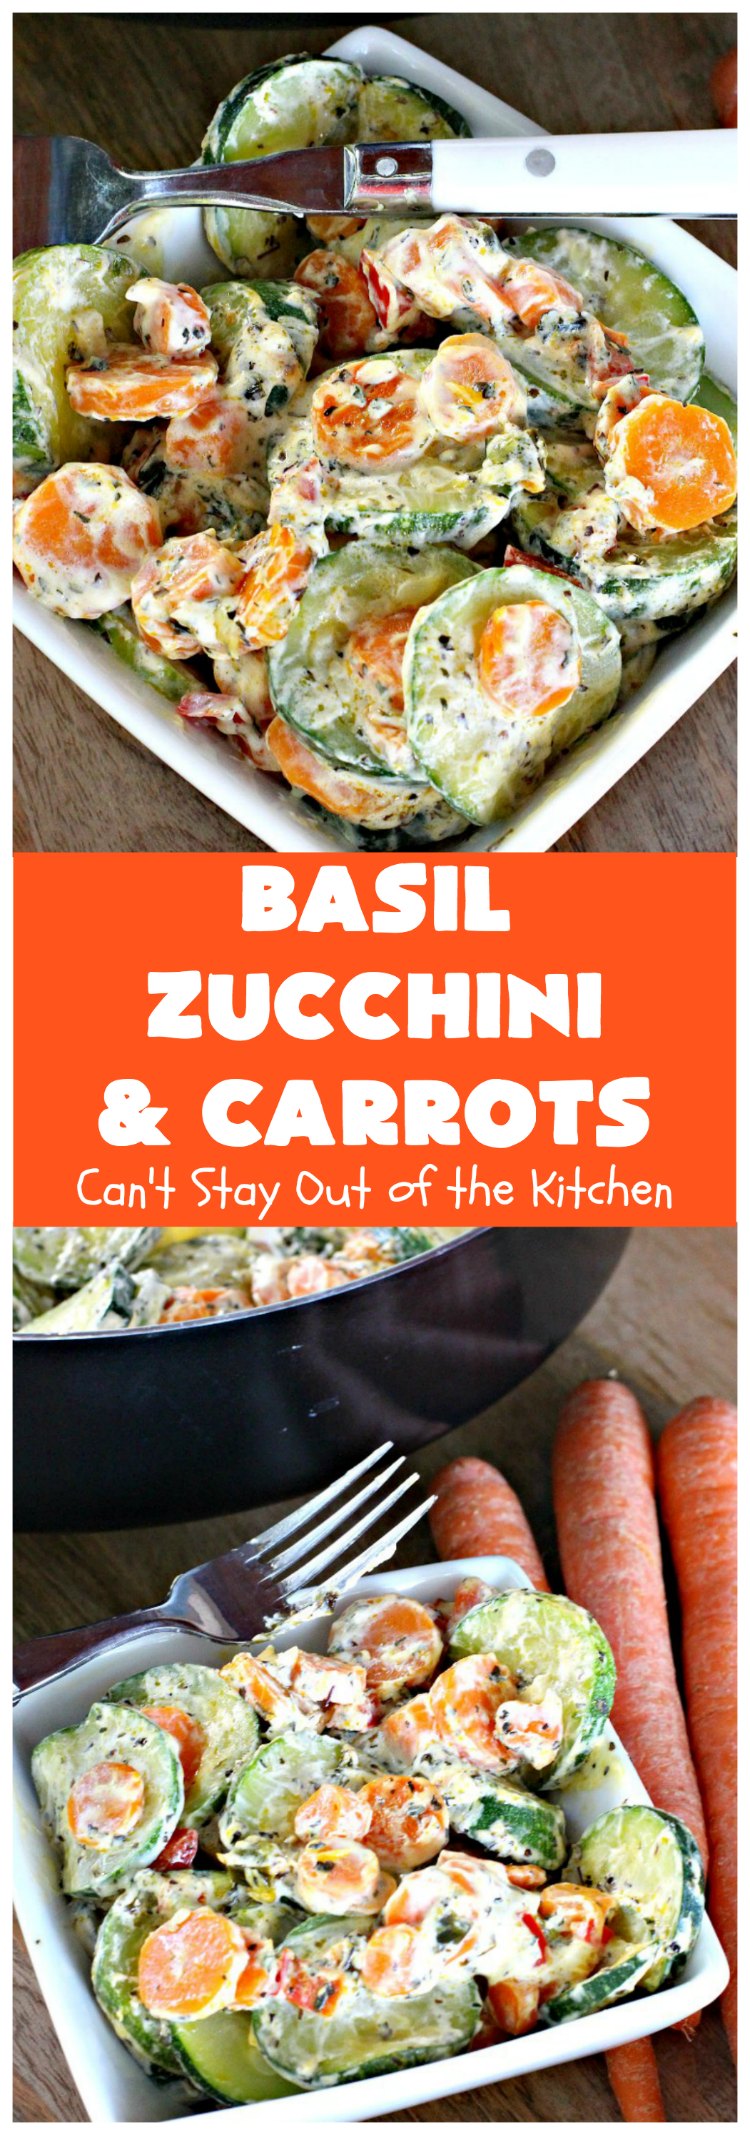 Basil Zucchini and Carrots | Can't Stay Out of the Kitchen